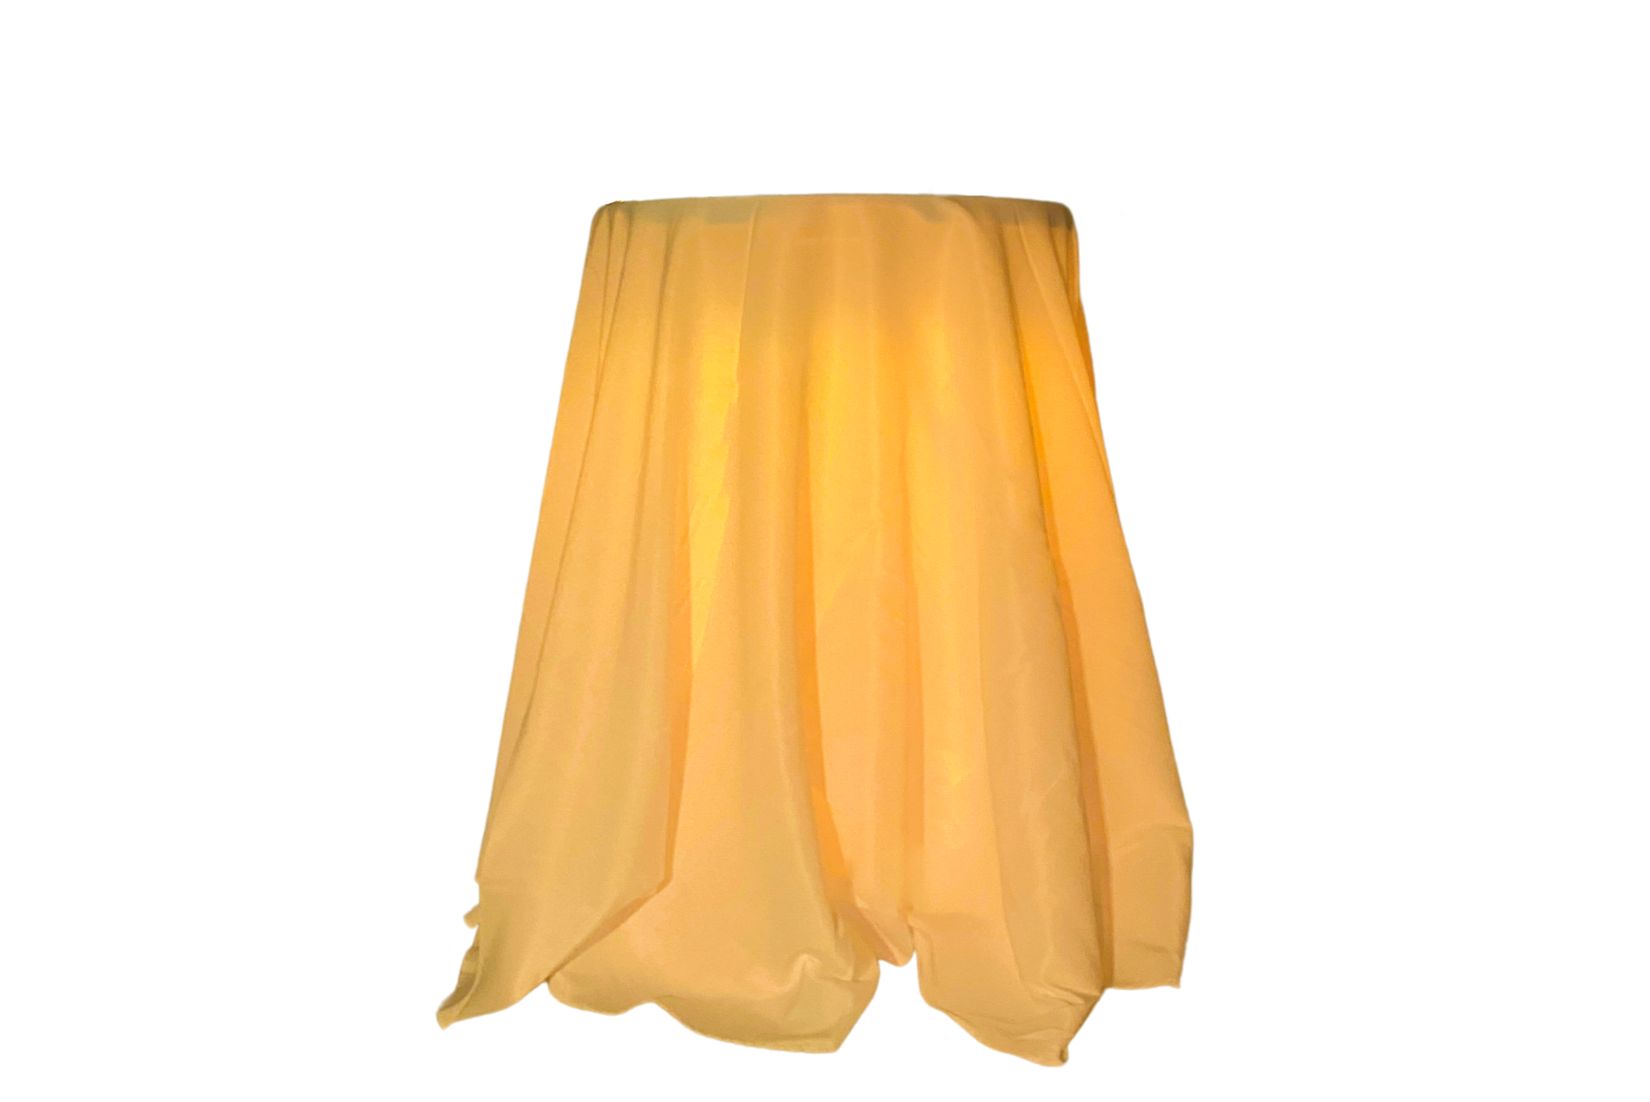 Highboy pub table with draped cloth and amber lighting. Table is for rent in PG county maryland